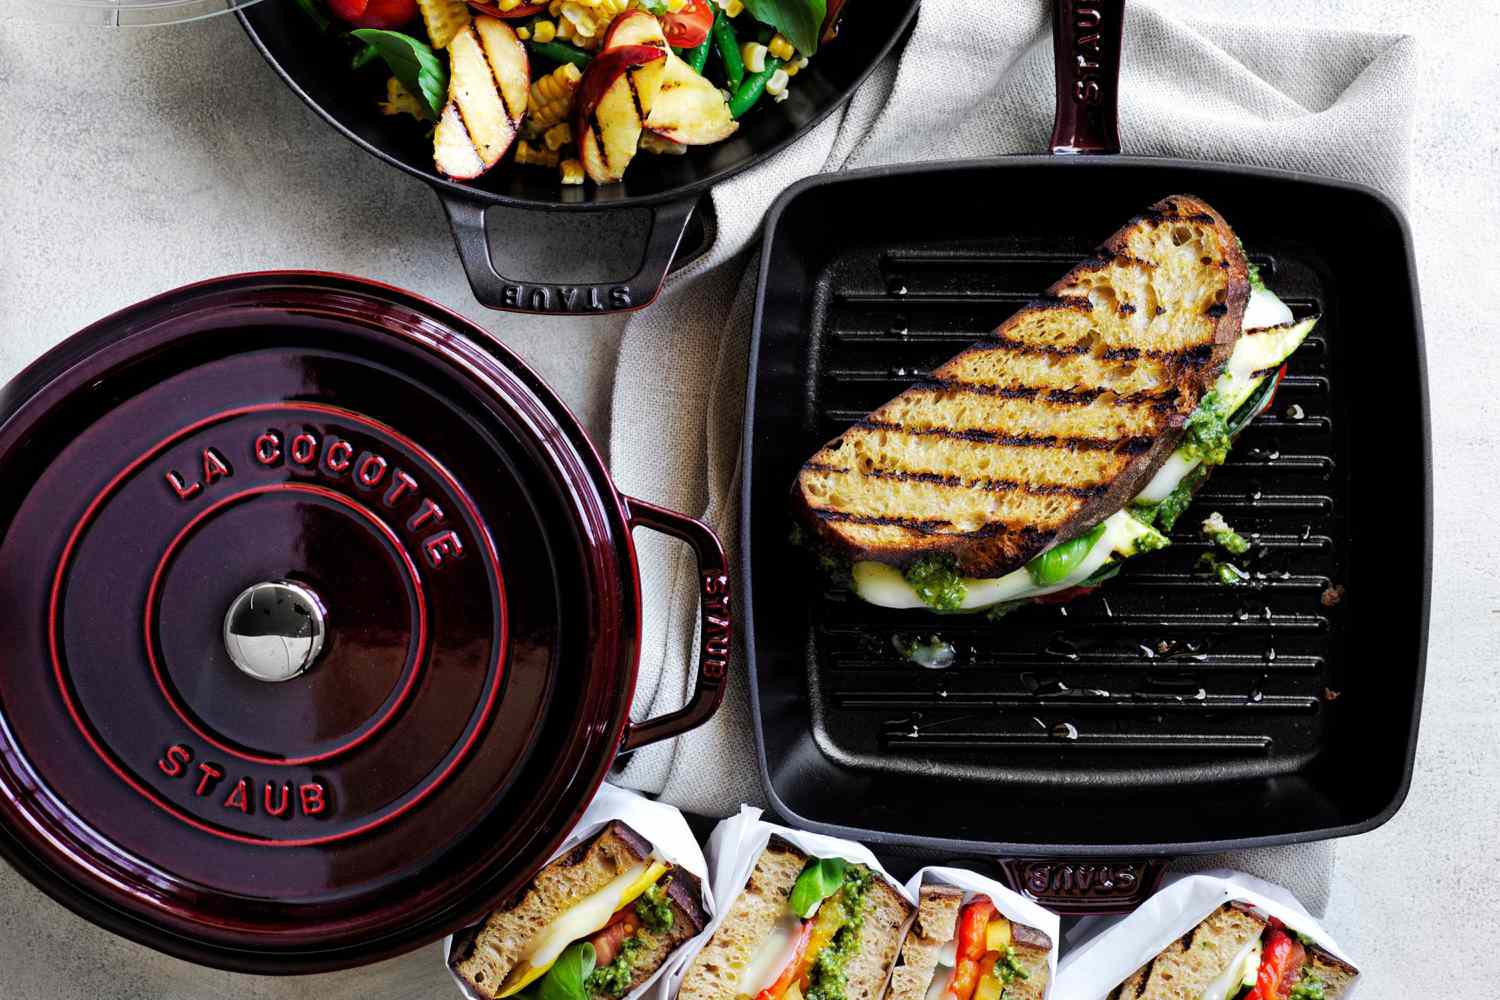 Save Up to 50% on Stunning French Cast Iron Cookware From Staub